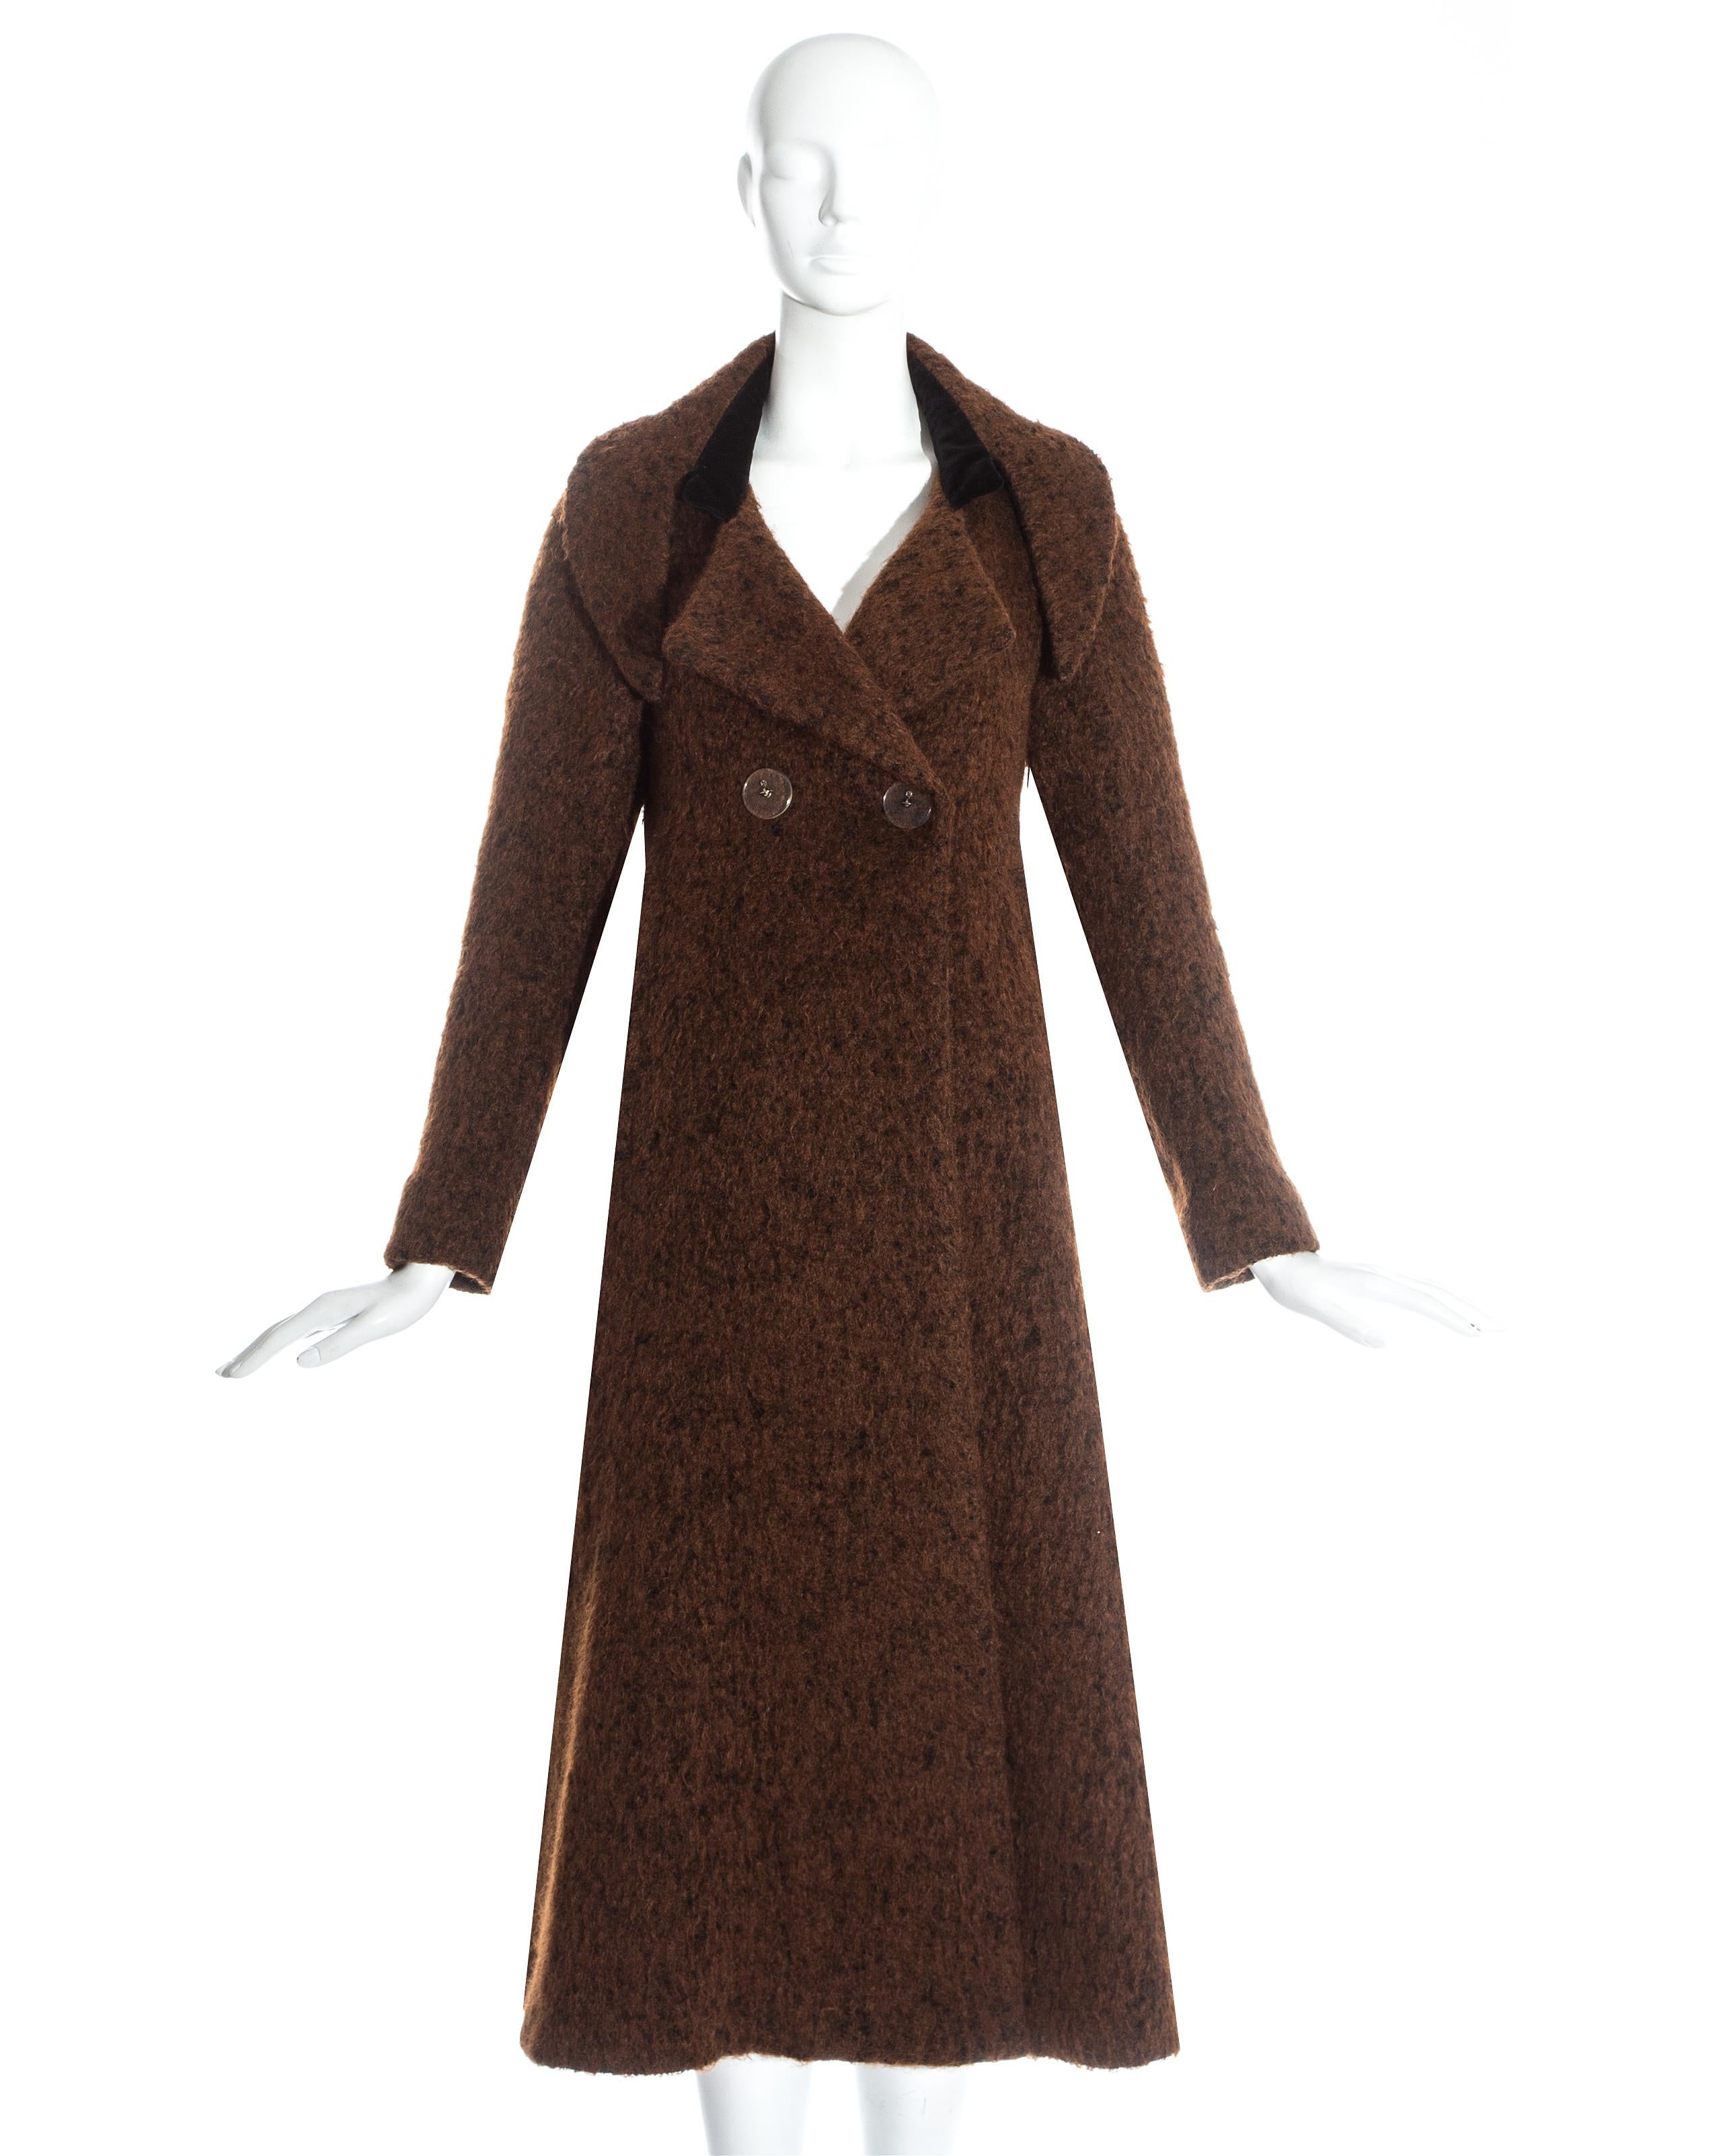 Vivienne Westwood brown wool swing coat with velvet. Oversized inverted lapels, large perspex Orb button and voluminous back panel. 

Portrait, Fall-Winter 1990 